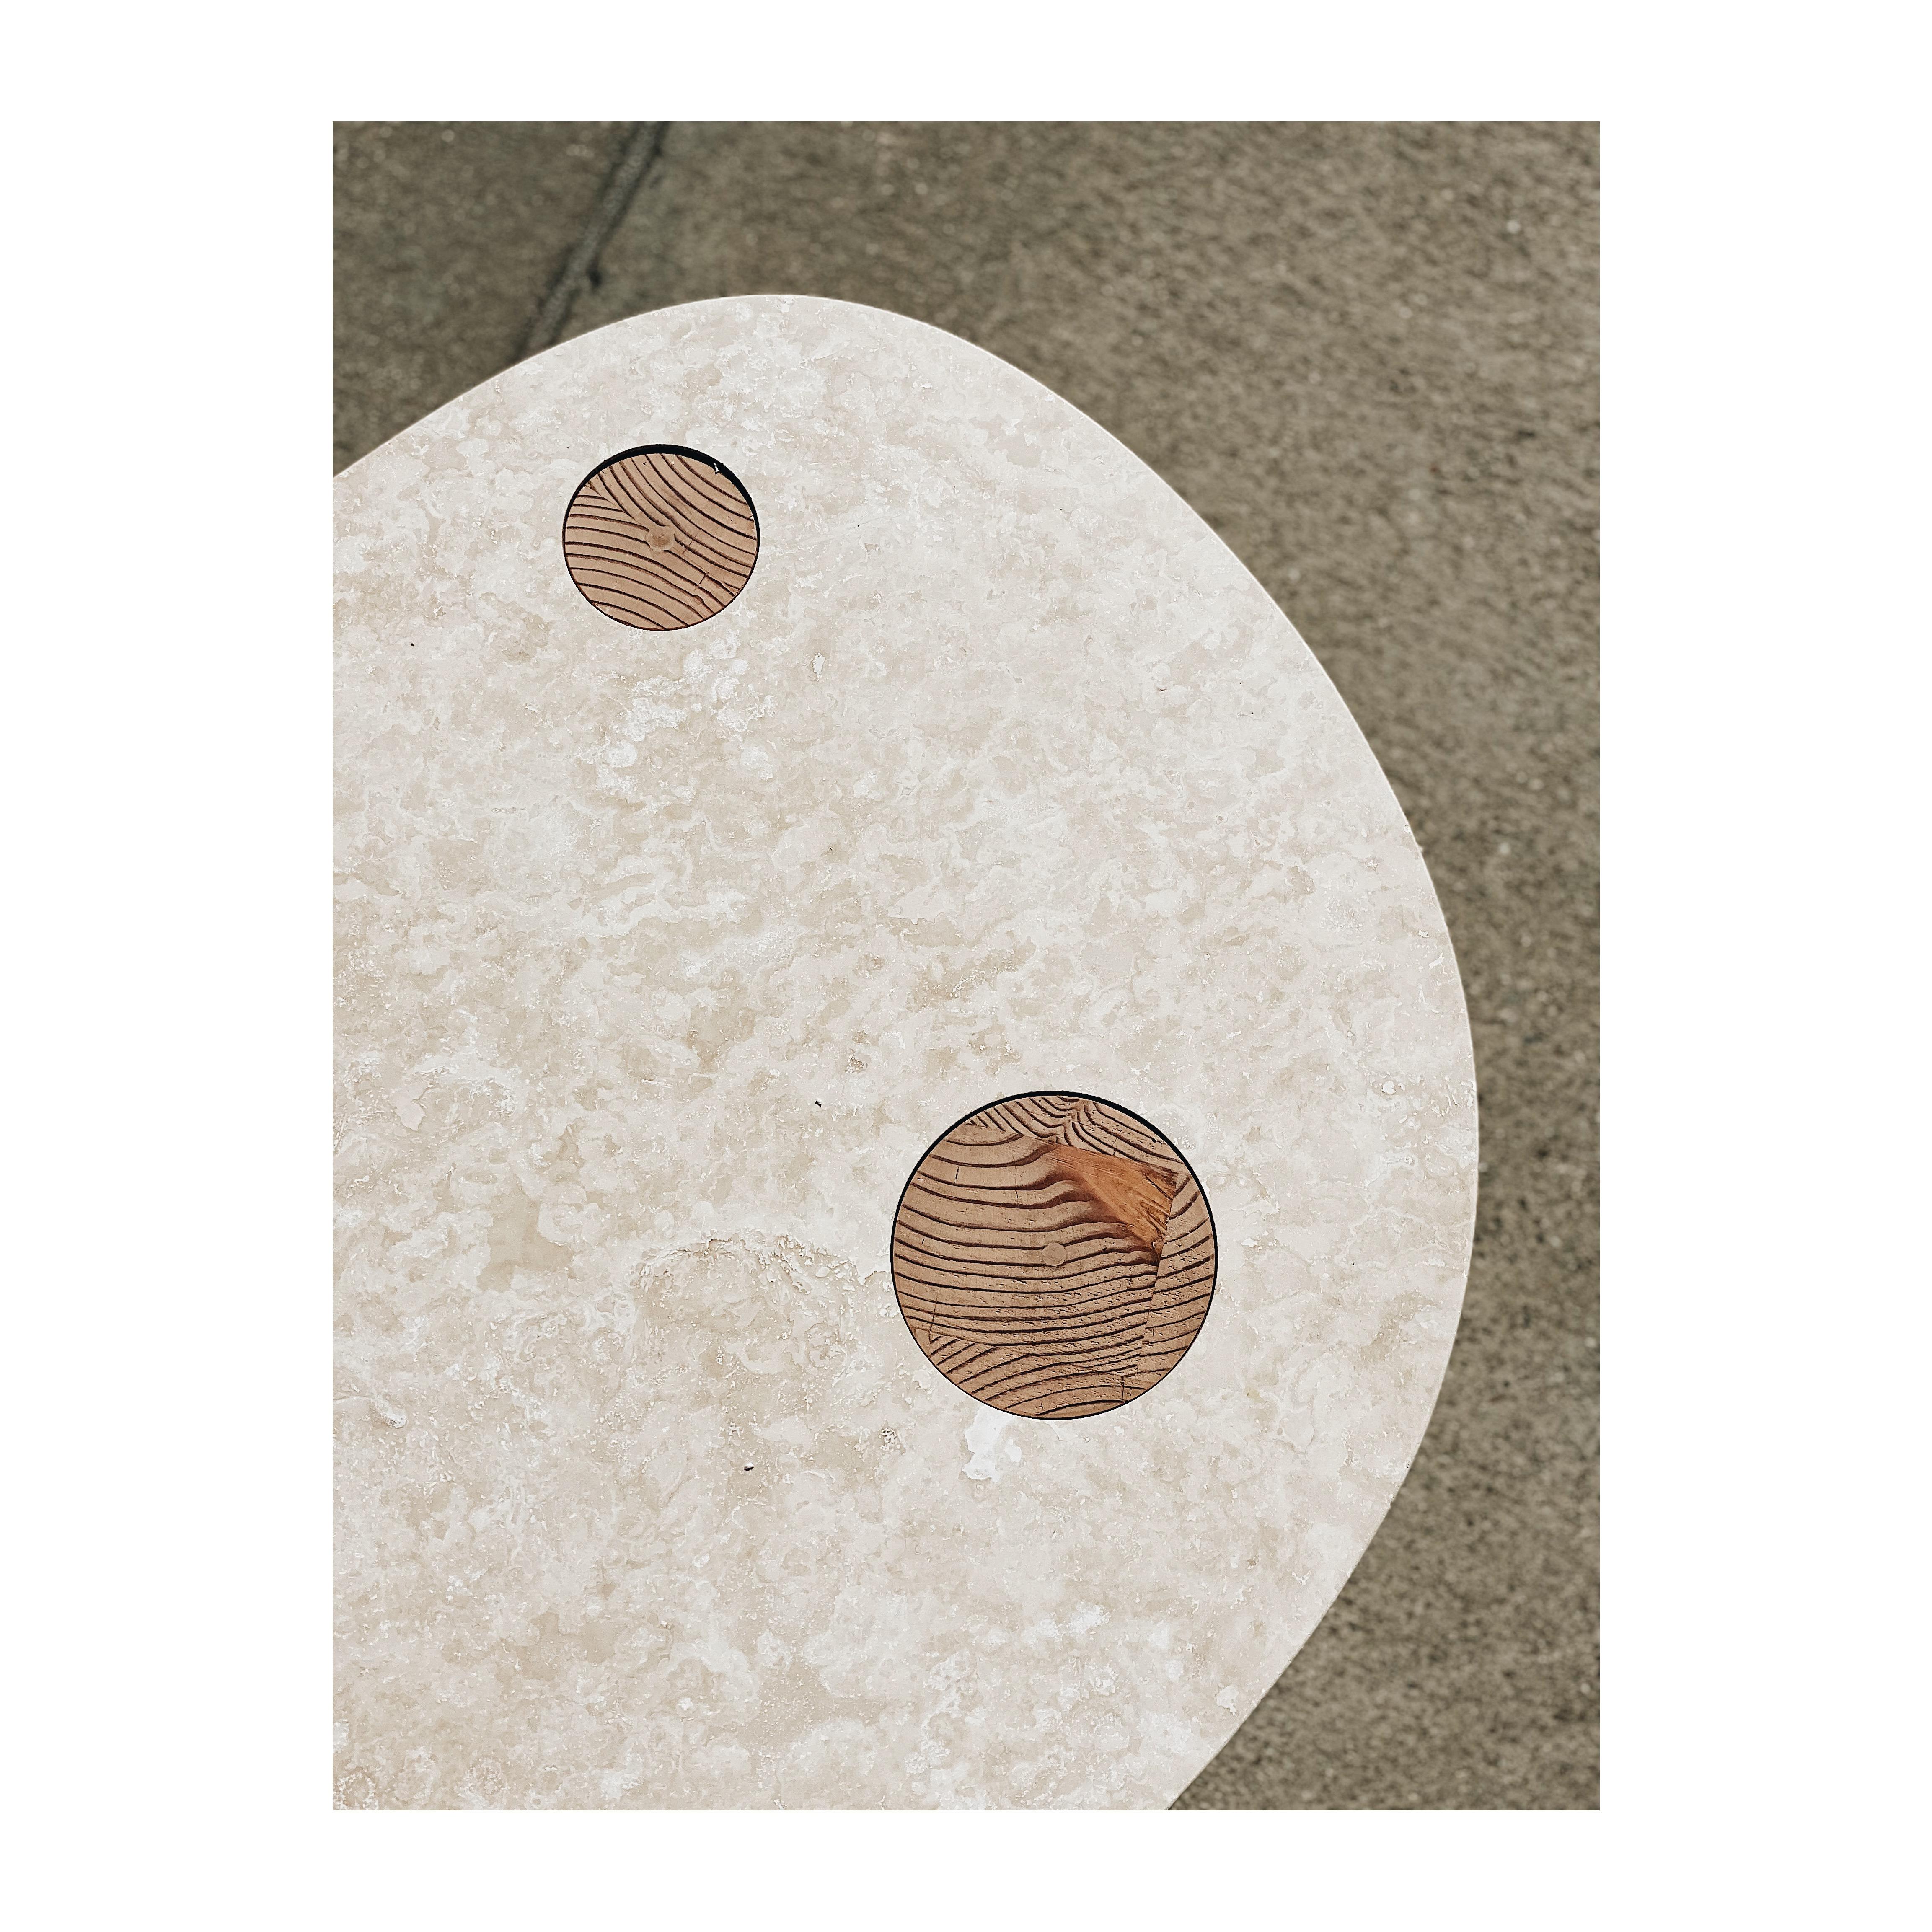 The coffee table focuses on the simplicity and engagement of two complimentary materials - travertine slab and solid wood. Solid stumps of Douglas Fir are turned by hand by our wood craftsmen and fitted perfectly into a machine cut openings on the